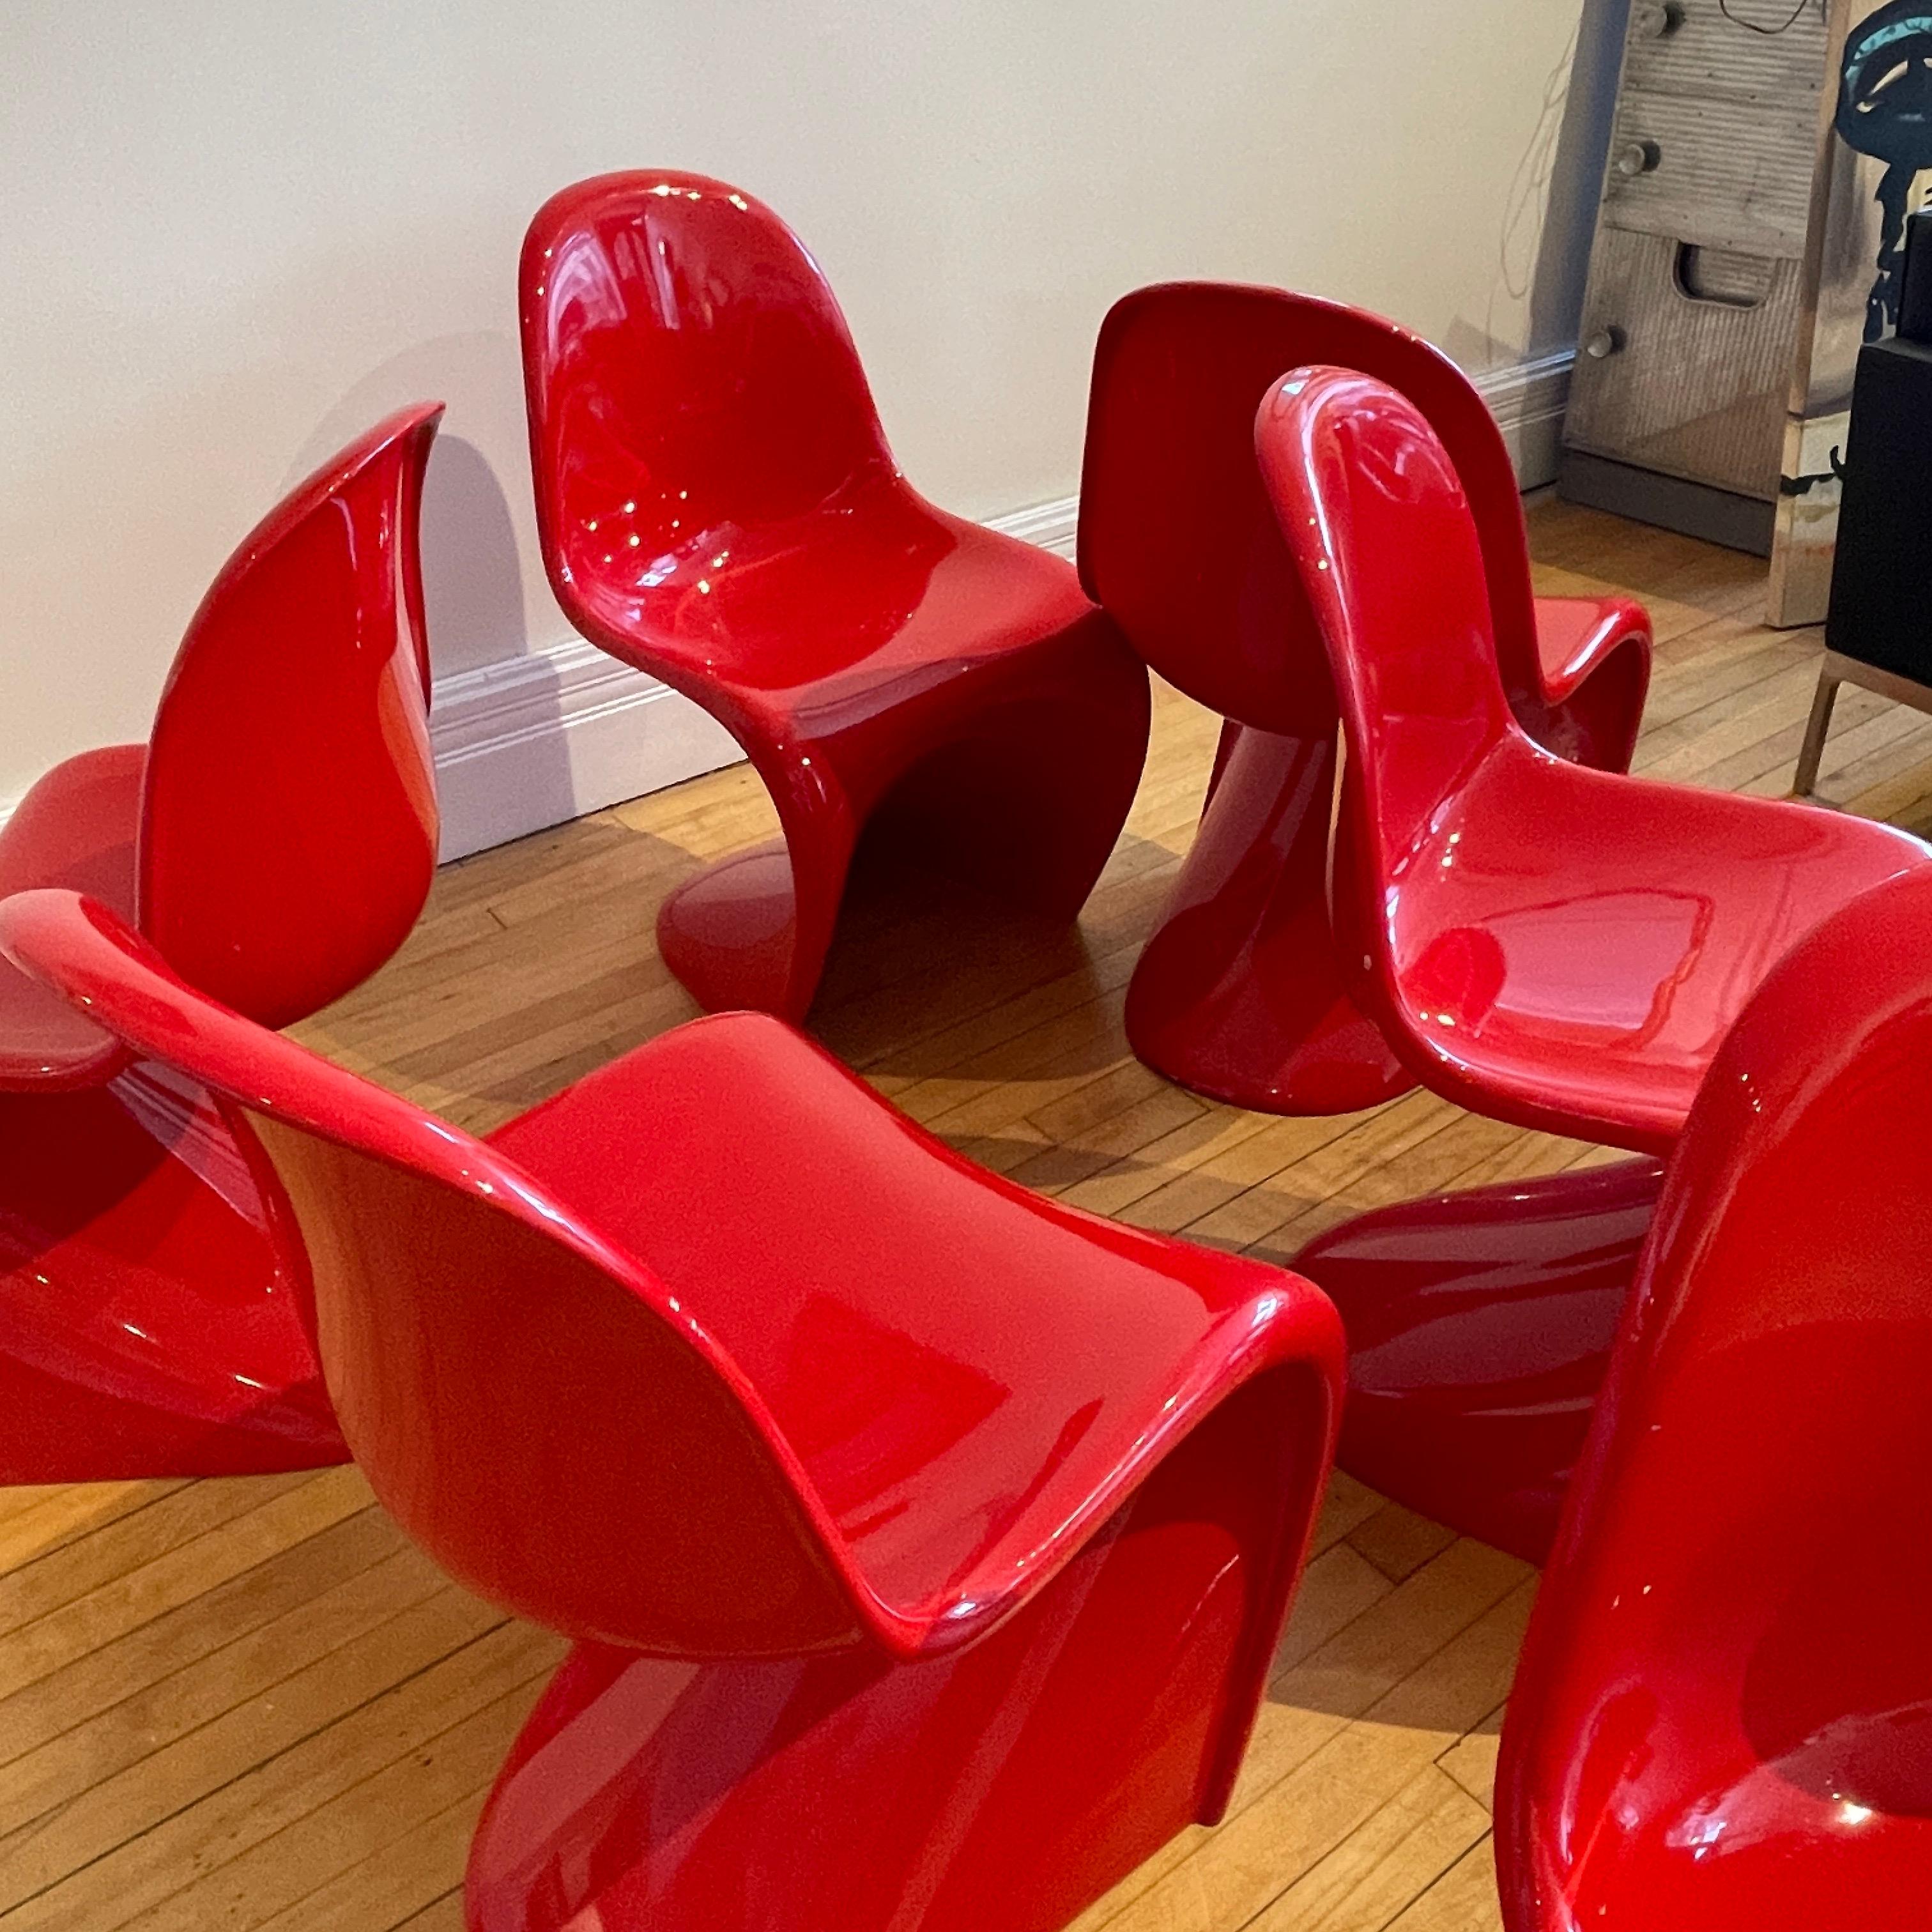 Verner Panton Classic Chairs in Red 2  Available 3